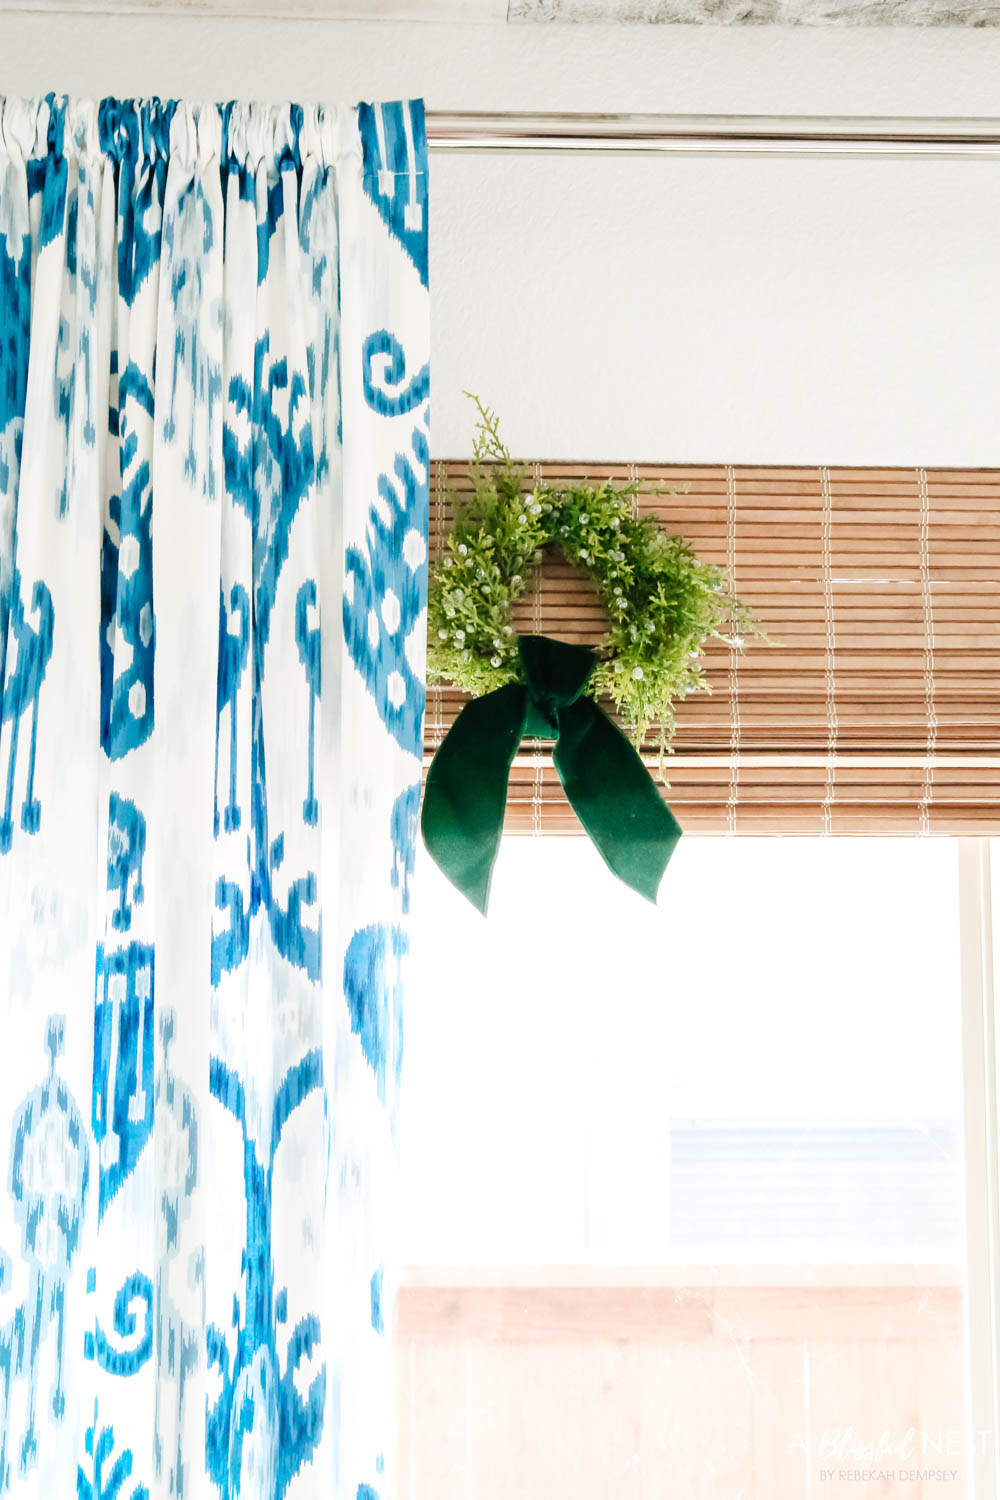 Mini wreaths with green velvet ribbons tied to bamboo shades